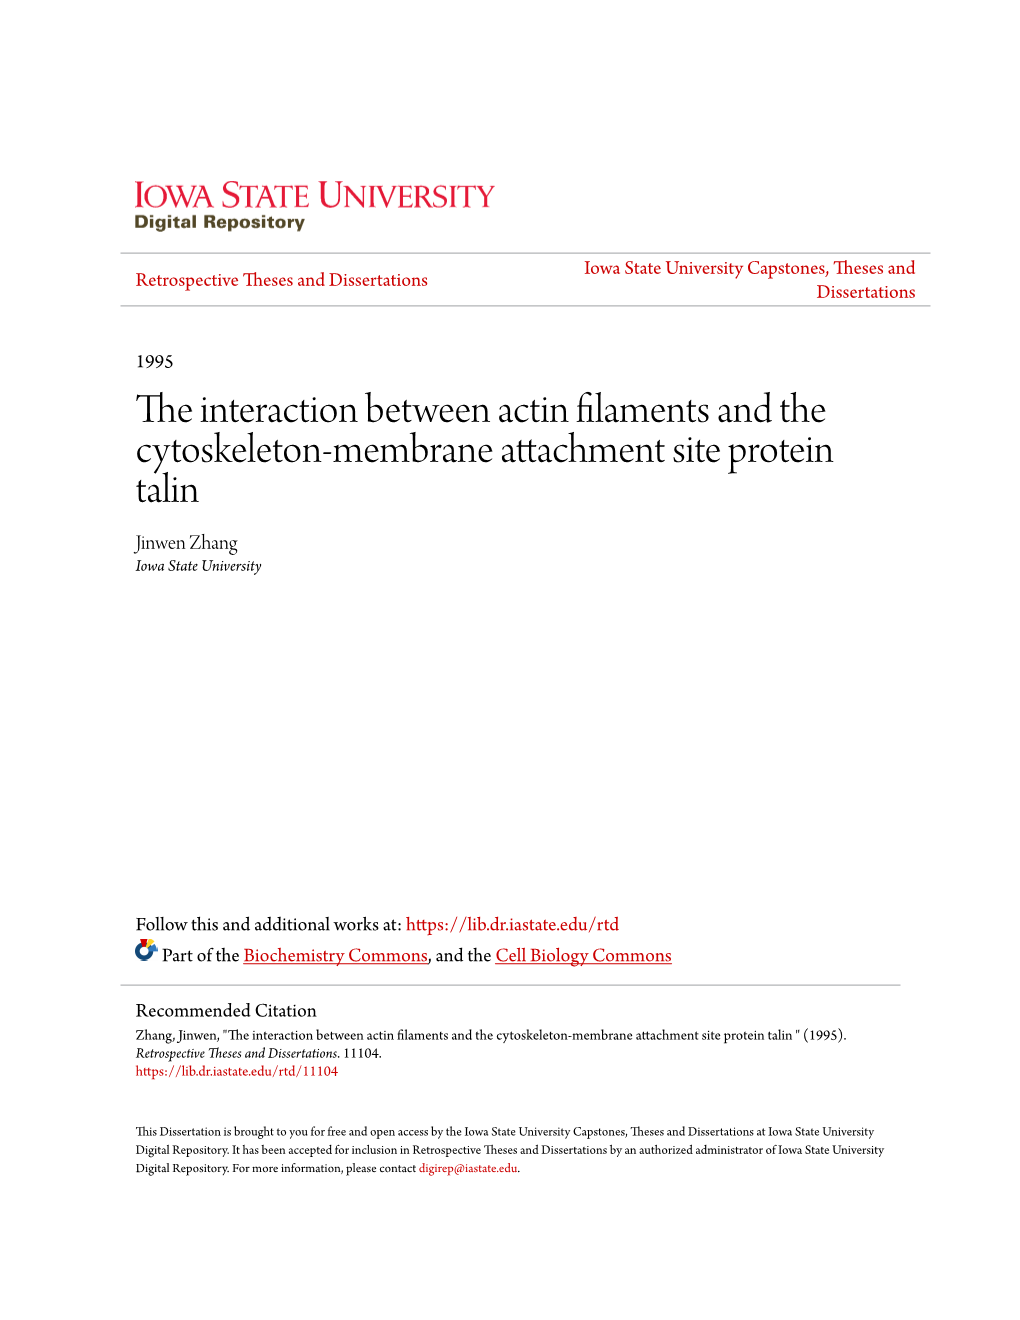 The Interaction Between Actin Filaments and the Cytoskeleton-Membrane Attachment Site Protein Talin Jinwen Zhang Iowa State University